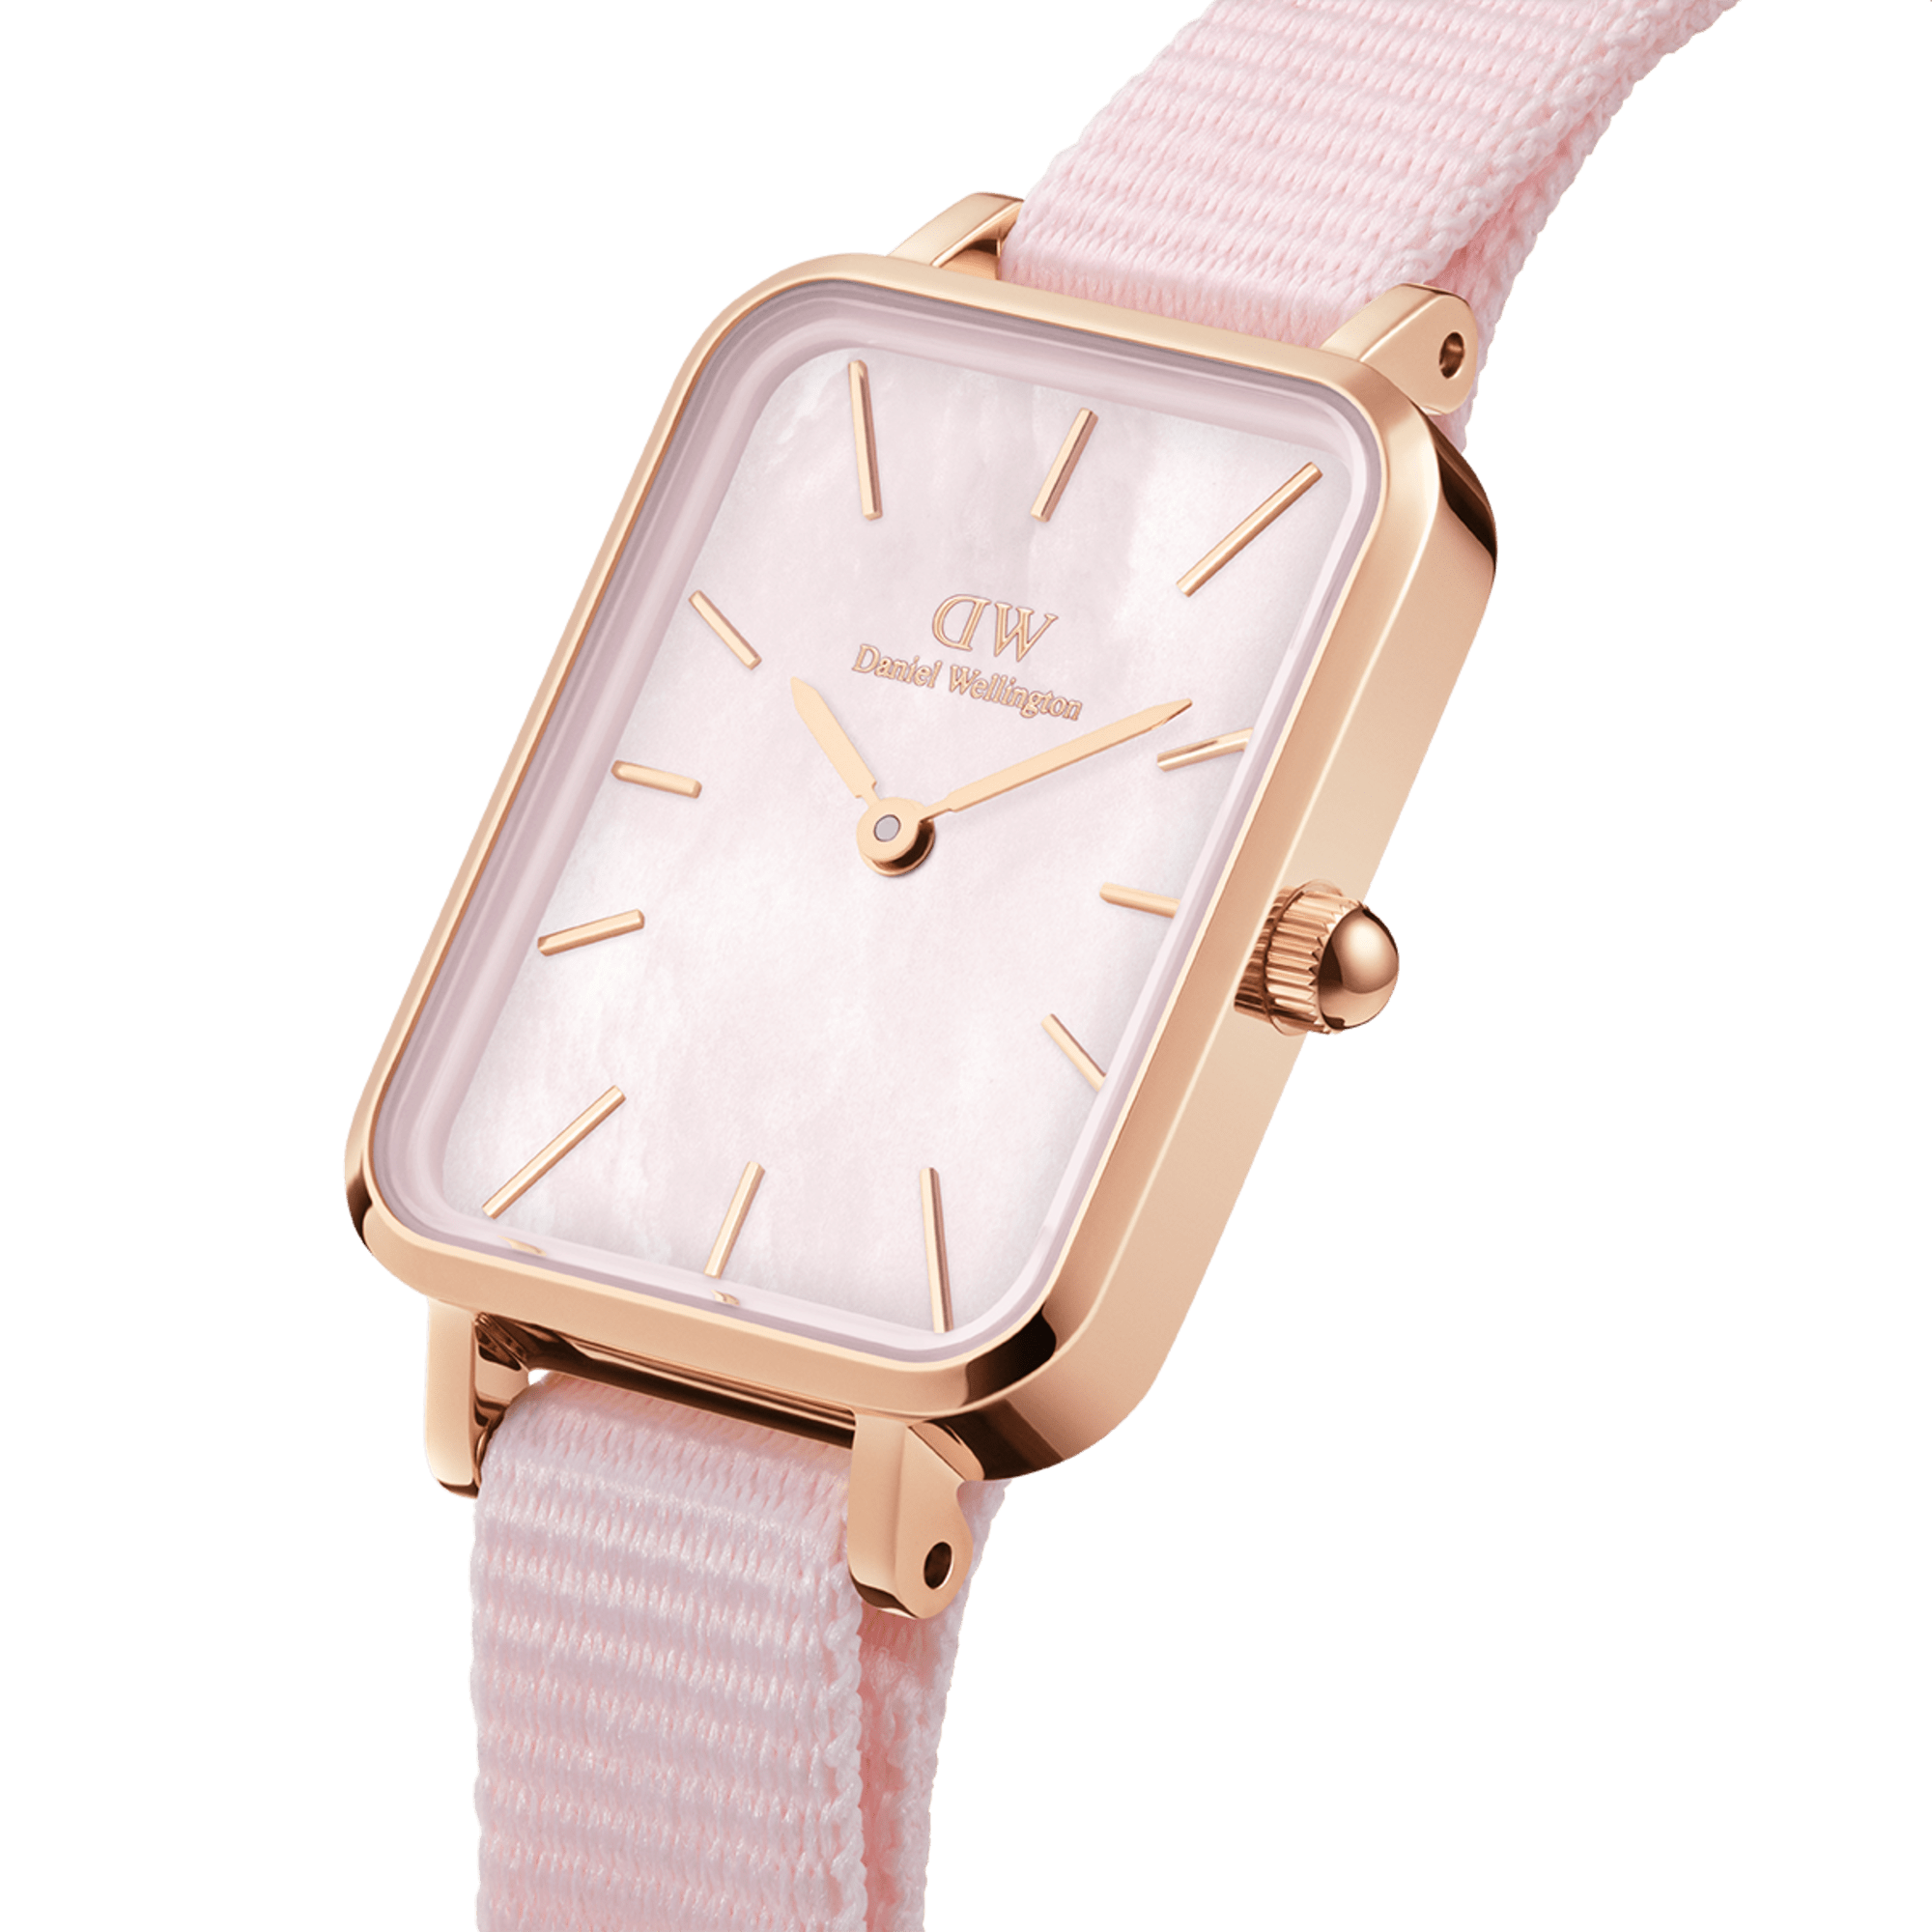 CORAL Watch - Jewelry - Watches - 105027660